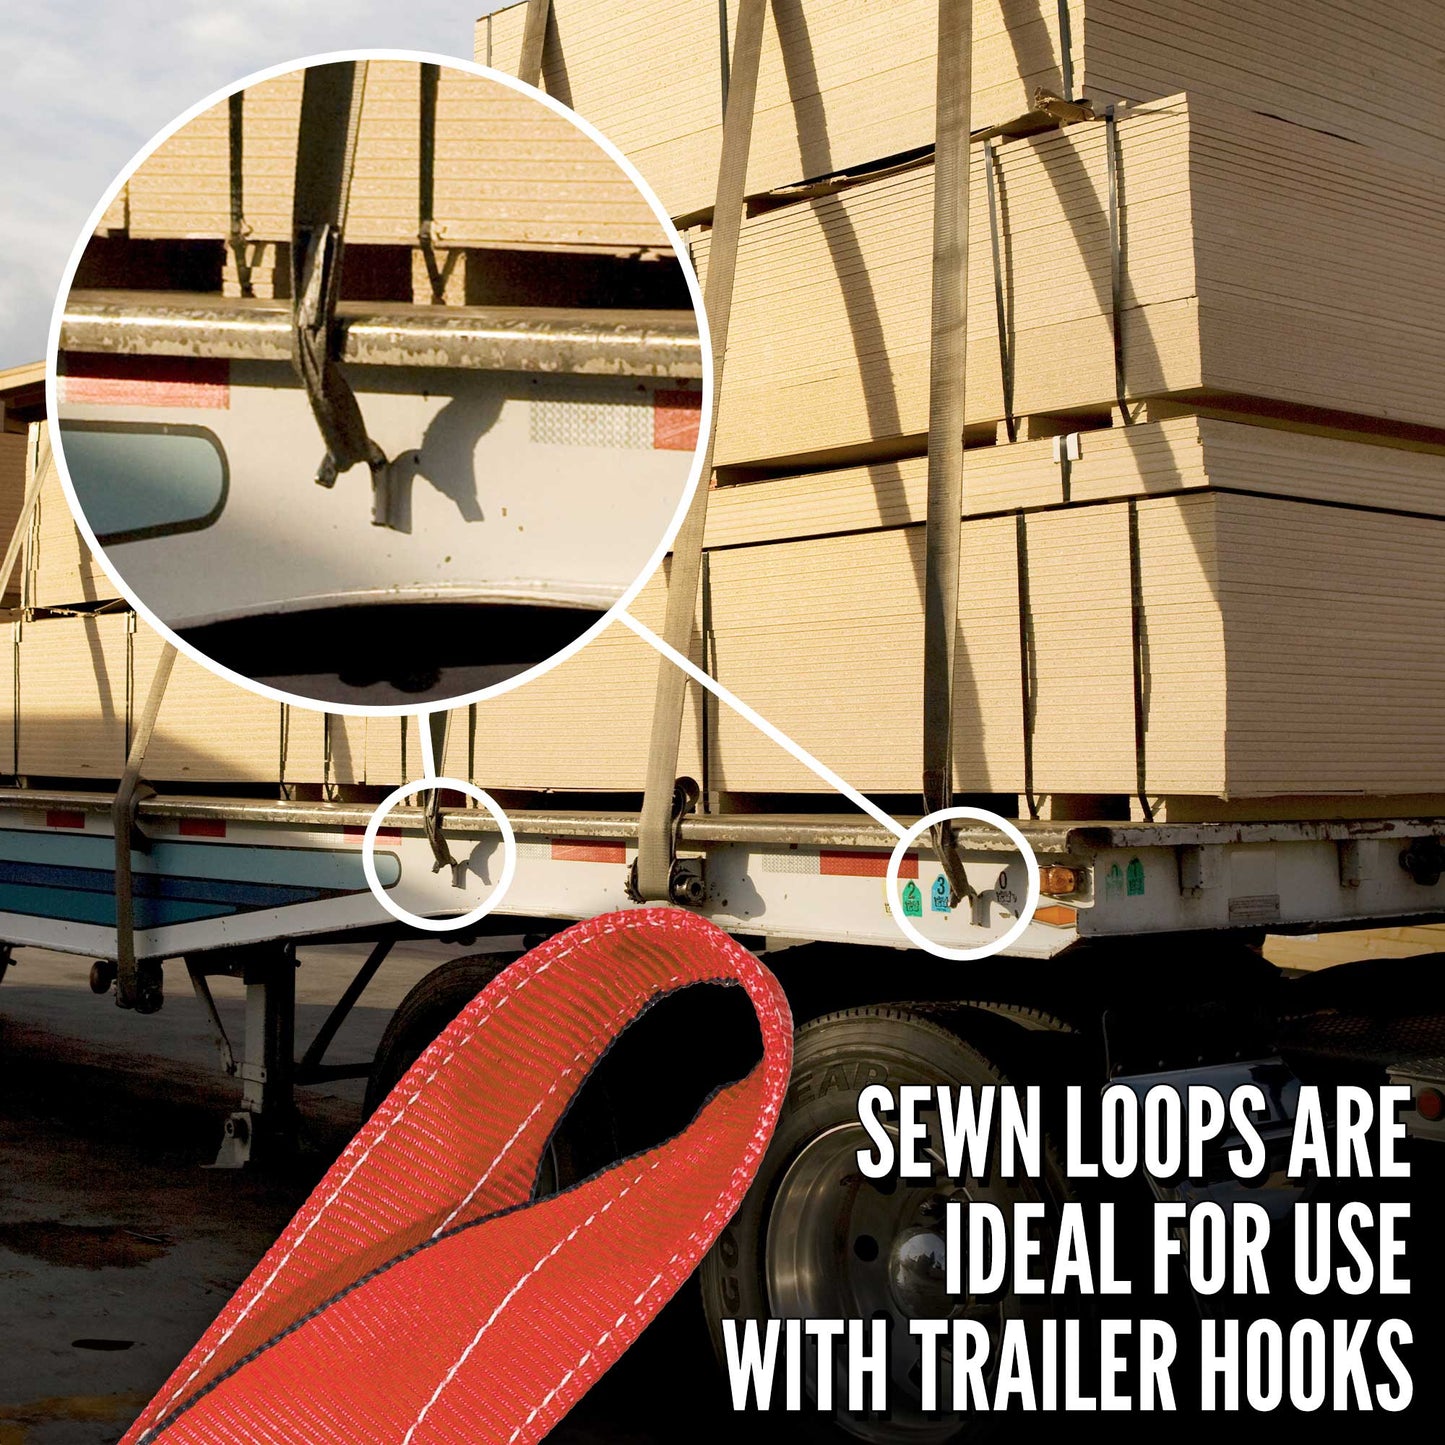 sewn loop straps are ideal for use with trailer hooks